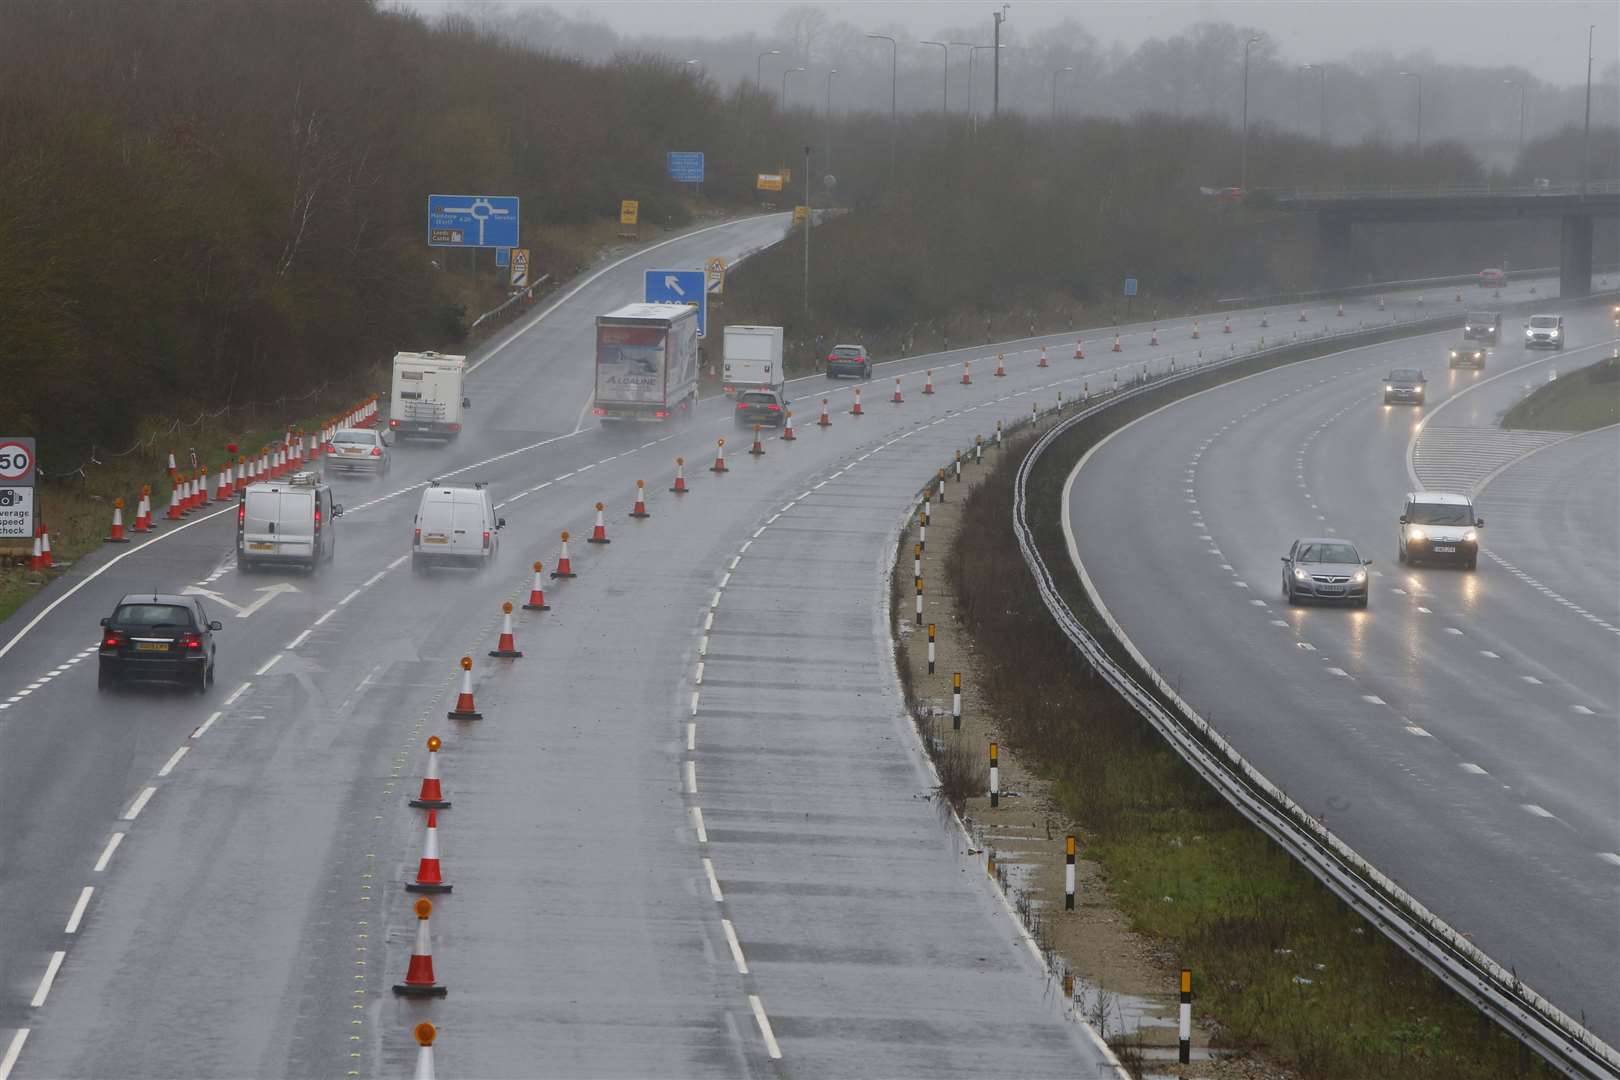 Work to dismantle the motorway barriers from Operation Brock began on Monday. Picture: Andy Jones